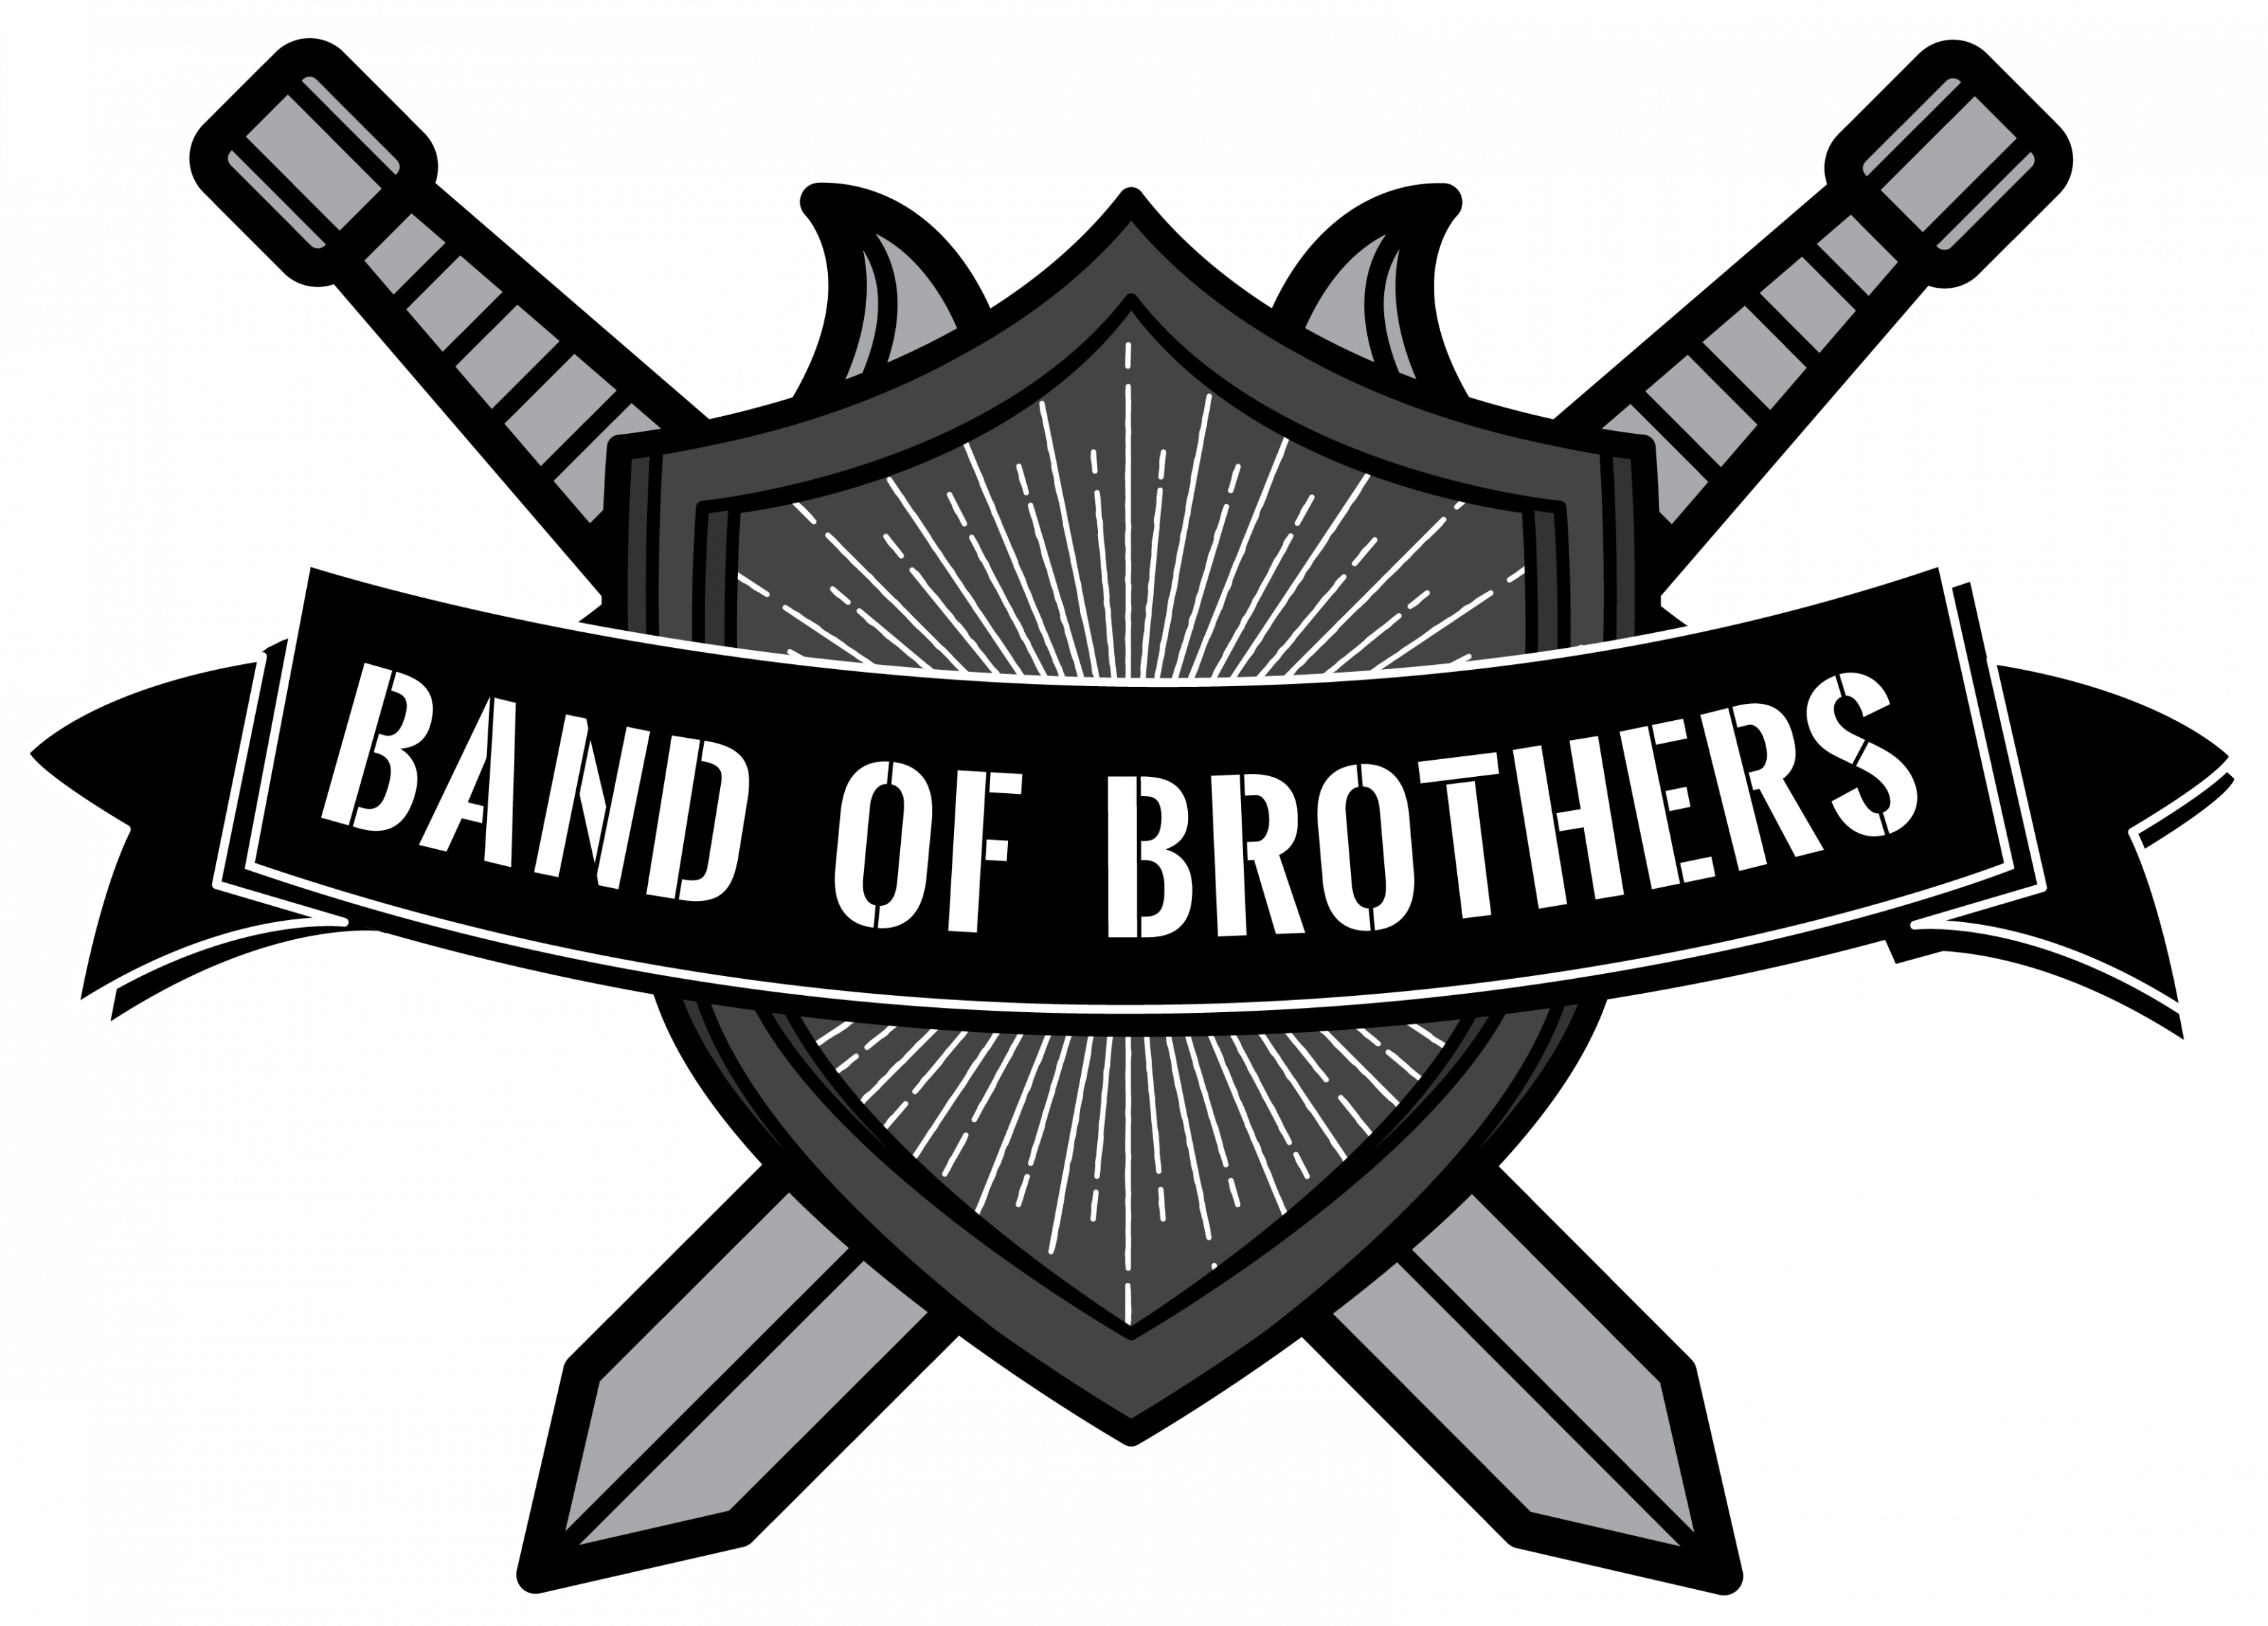 Band of Brothers Logo - Sexual and Porn Addiction Treatment, Family Counselling in AZ - Band ...